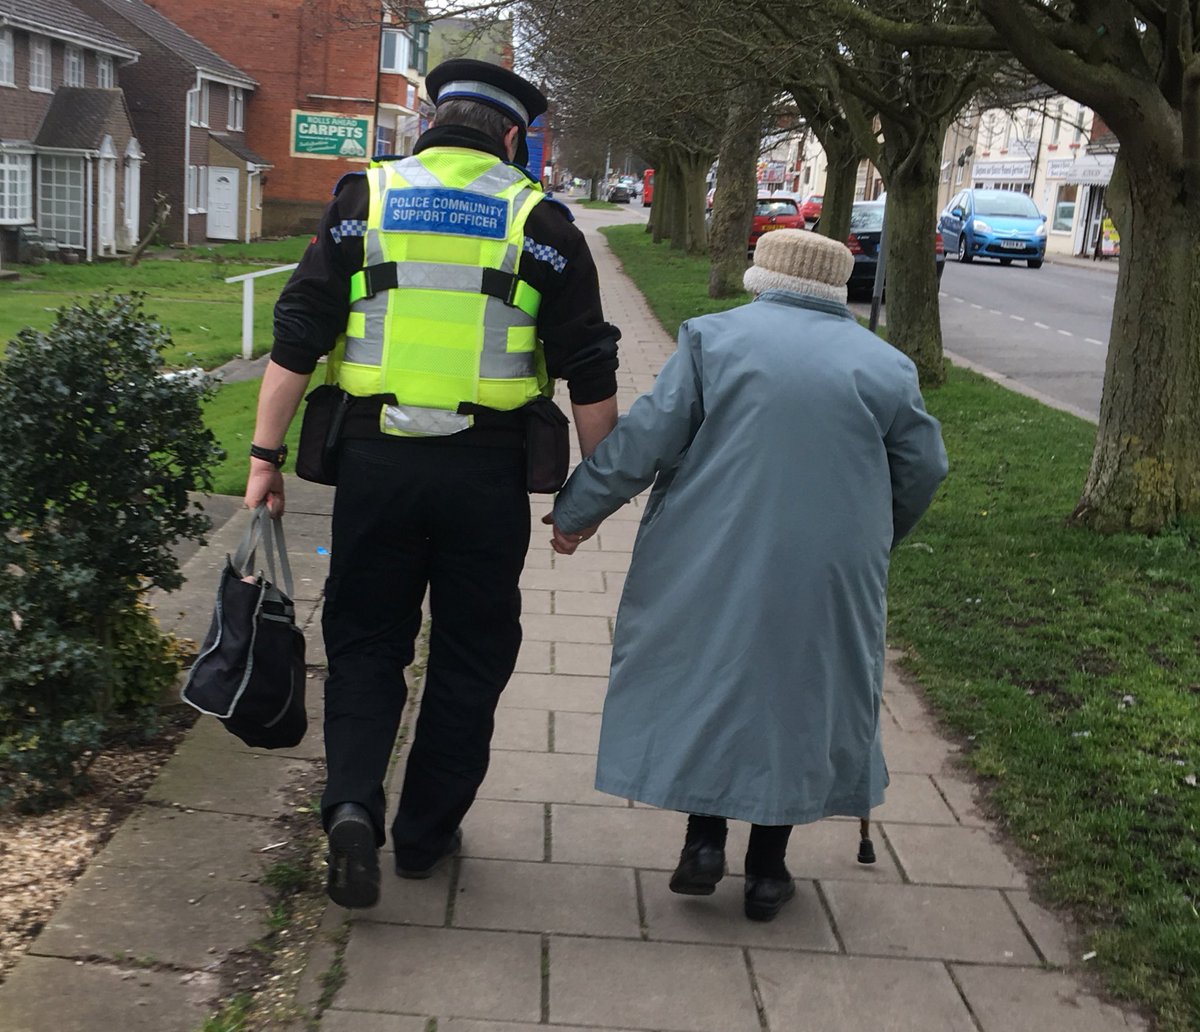 An image of a police officer helping an elderly woman in Lincolnshire has exposed the softer side of policing. PCSO Dave Bunker is photographed holding hands with a woman who had lost her way in Skegness. The kind gesture touched the hearts of many who have taken to Twitter to share words of support for the officer.

Source:  Twitter / @ColinHaigh791